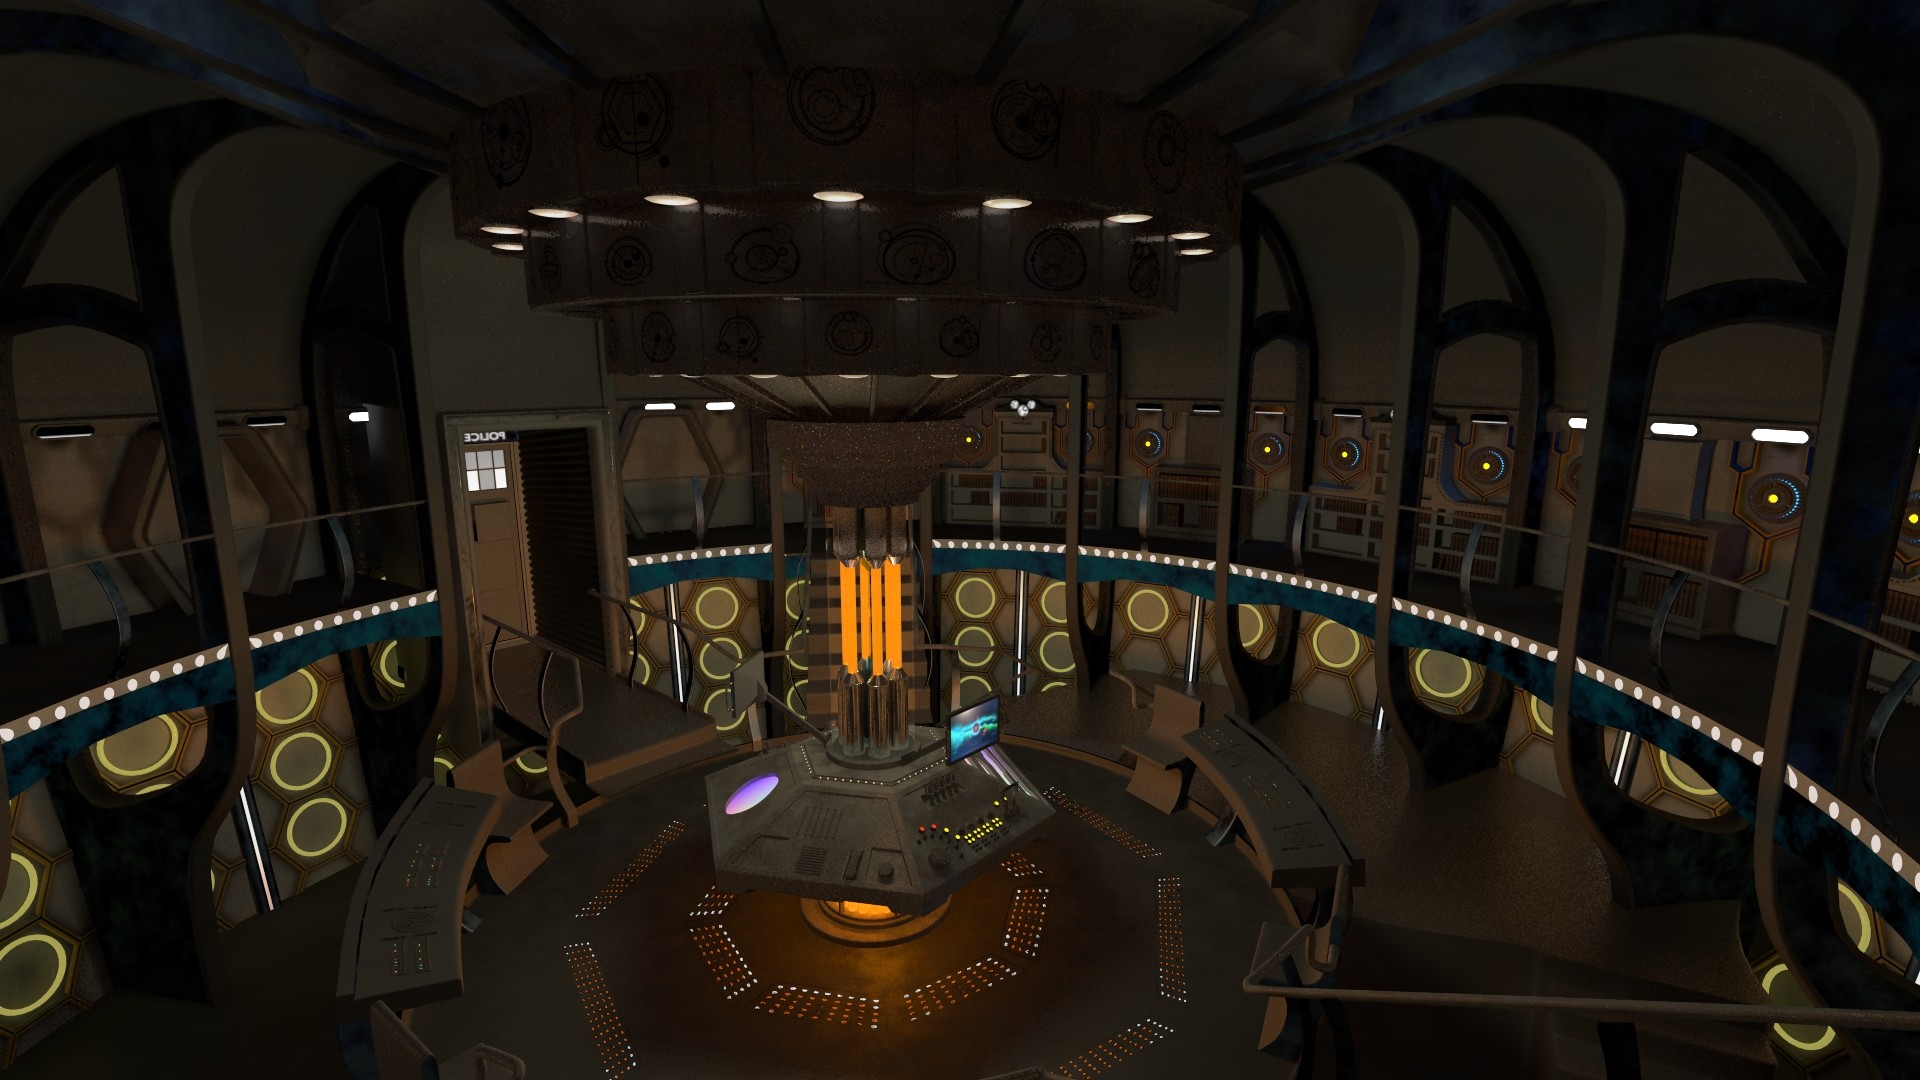 1920x1080 TARDIS console room - 2015 WIP by thy4205 on DeviantArt